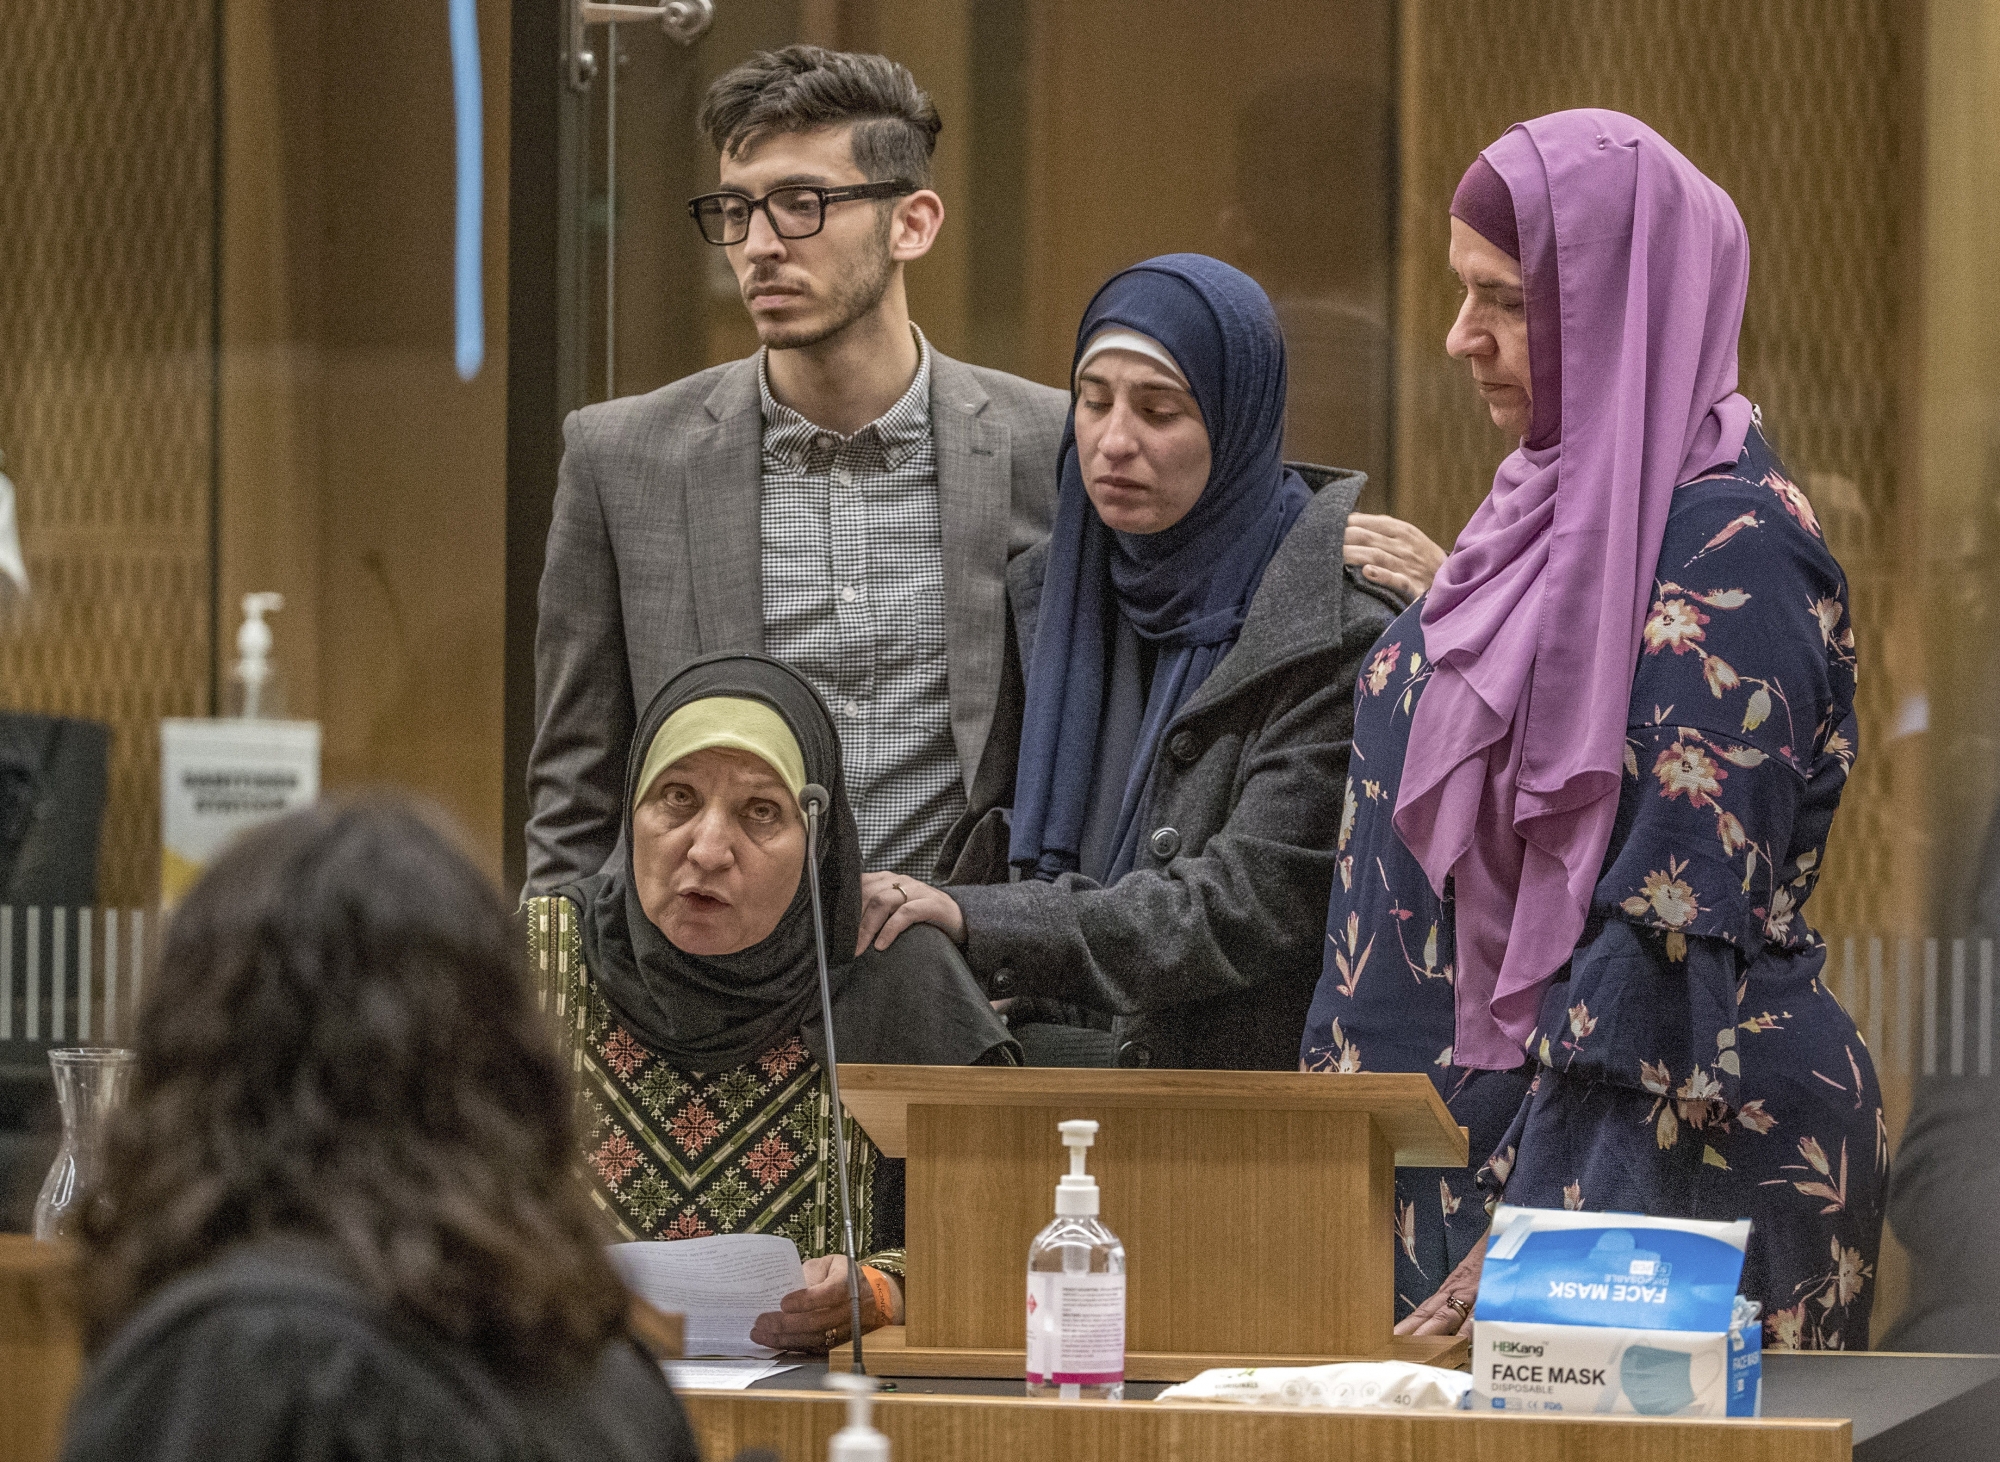 Maysoon Salama, mother of a Mosque shooting victim, with her family, speaks to shooter 29-year-old Australian Brenton Harrison Tarrant at the Christchurch High Court for sentencing after pleading guilty to 51 counts of murder, 40 counts of attempted murder and one count of terrorism in Christchurch, New Zealand, Monday, Aug. 24, 2020. More than 60 survivors and family members will confront the New Zealand mosque gunman this week when he appears in court to be sentenced for his crimes in the worst atrocity in the nation's modern history. (John Kirk-Anderson/Pool Photo via AP) ArcInfo